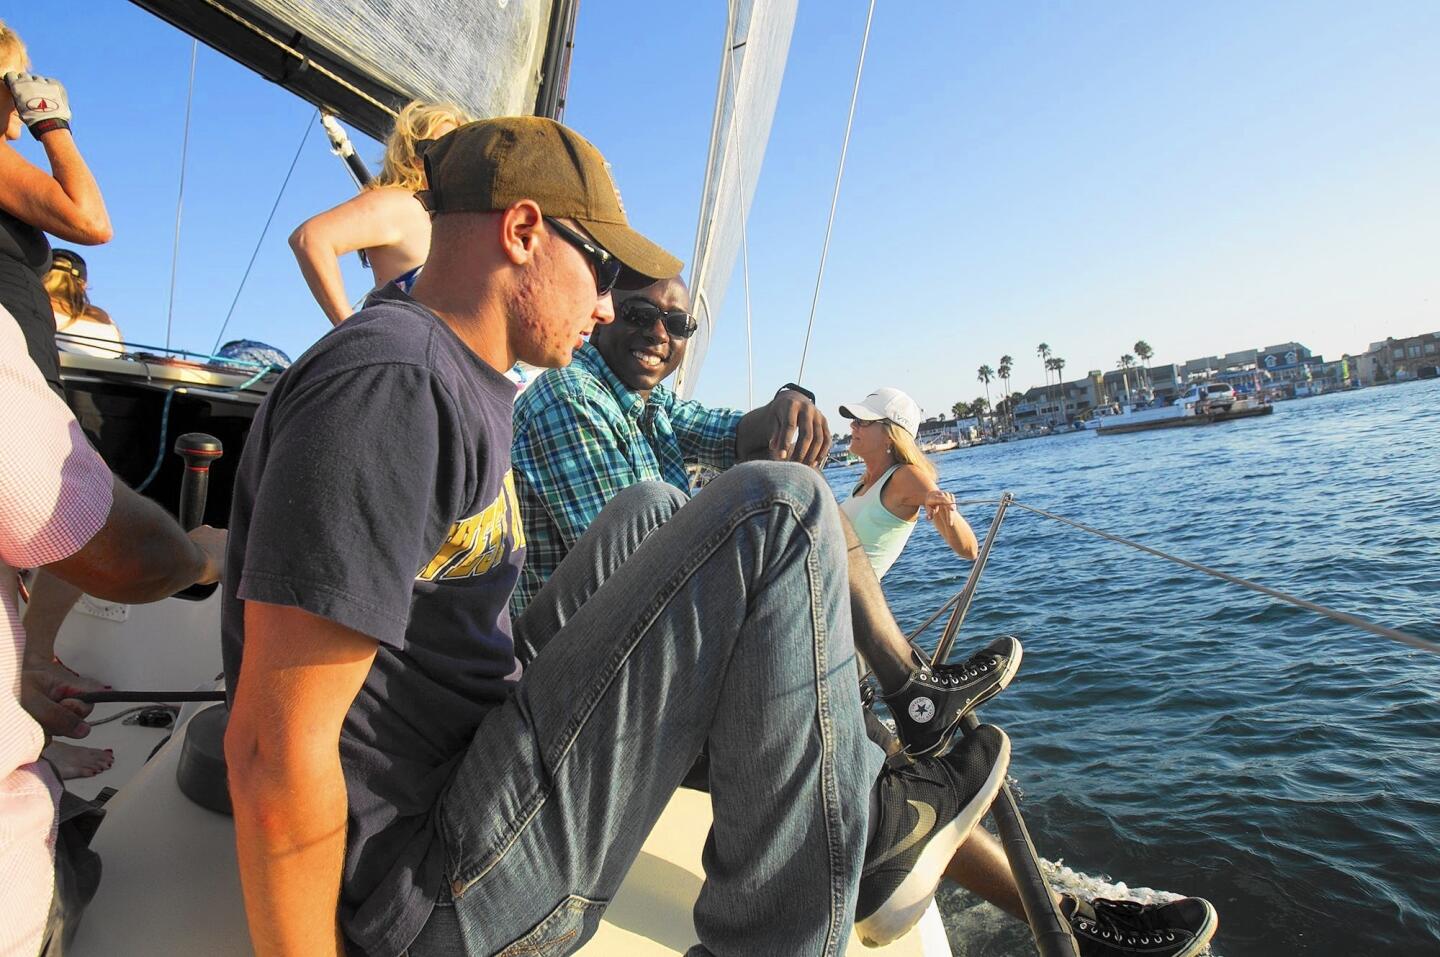 Pfc. Tyler Warner, left, and Pfc. Kris Tolbert of the 1st Battalion, 1st Marines from Camp Pendleton take an evening sail at Newport Harbor on Thursday on a 40-foot sailboat named Wild Thing with members of the Balboa Yacht Club.